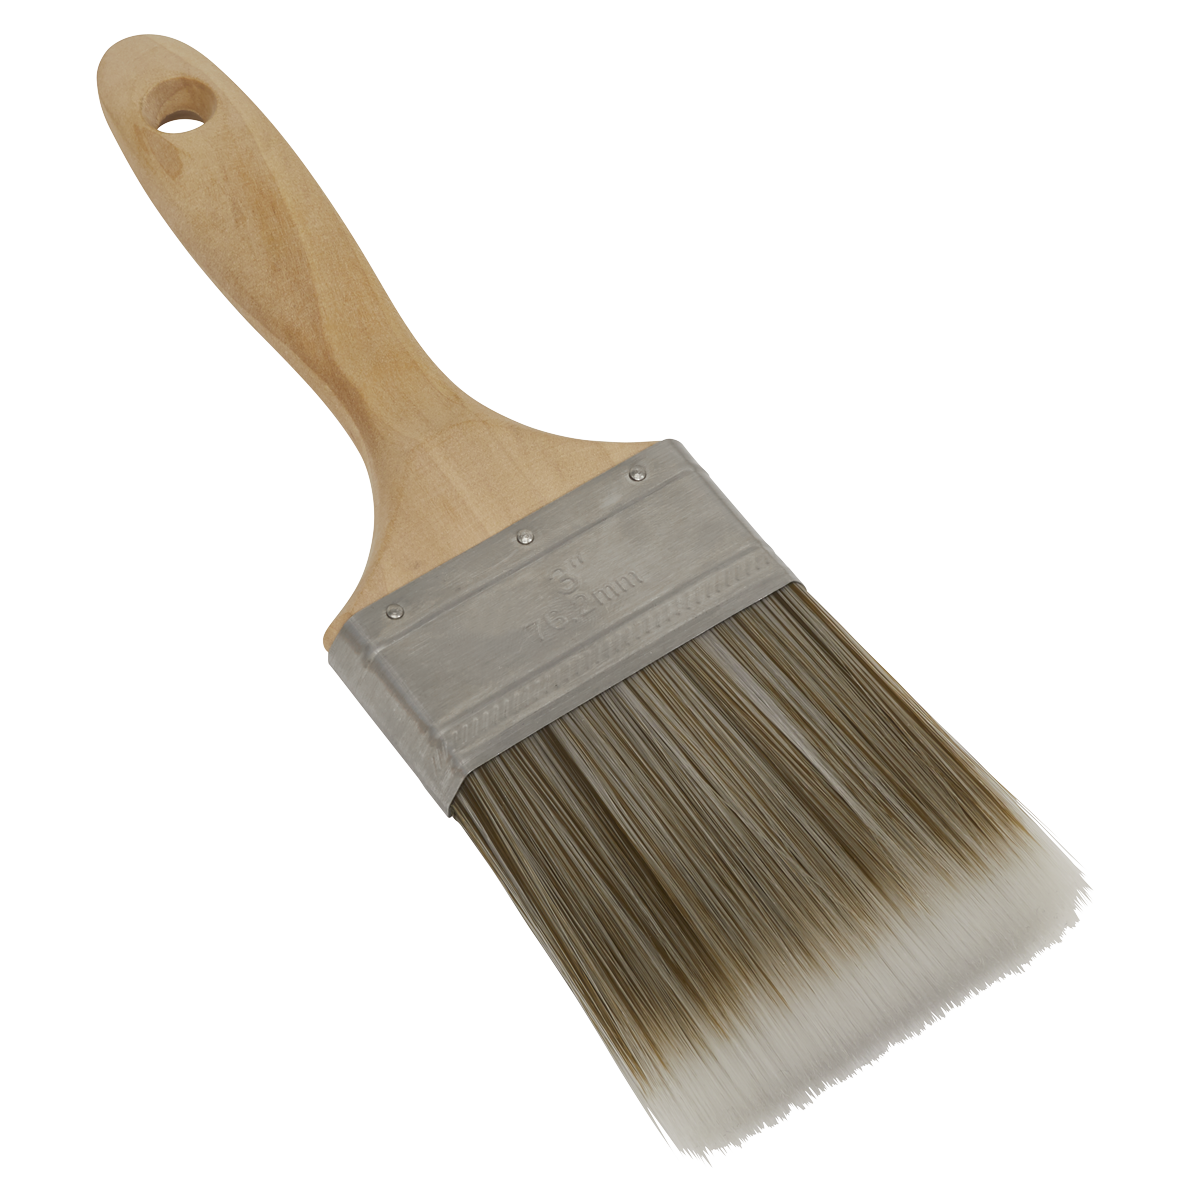 Sealey 76mm Wooden Handle Paint Brush SPBS76W